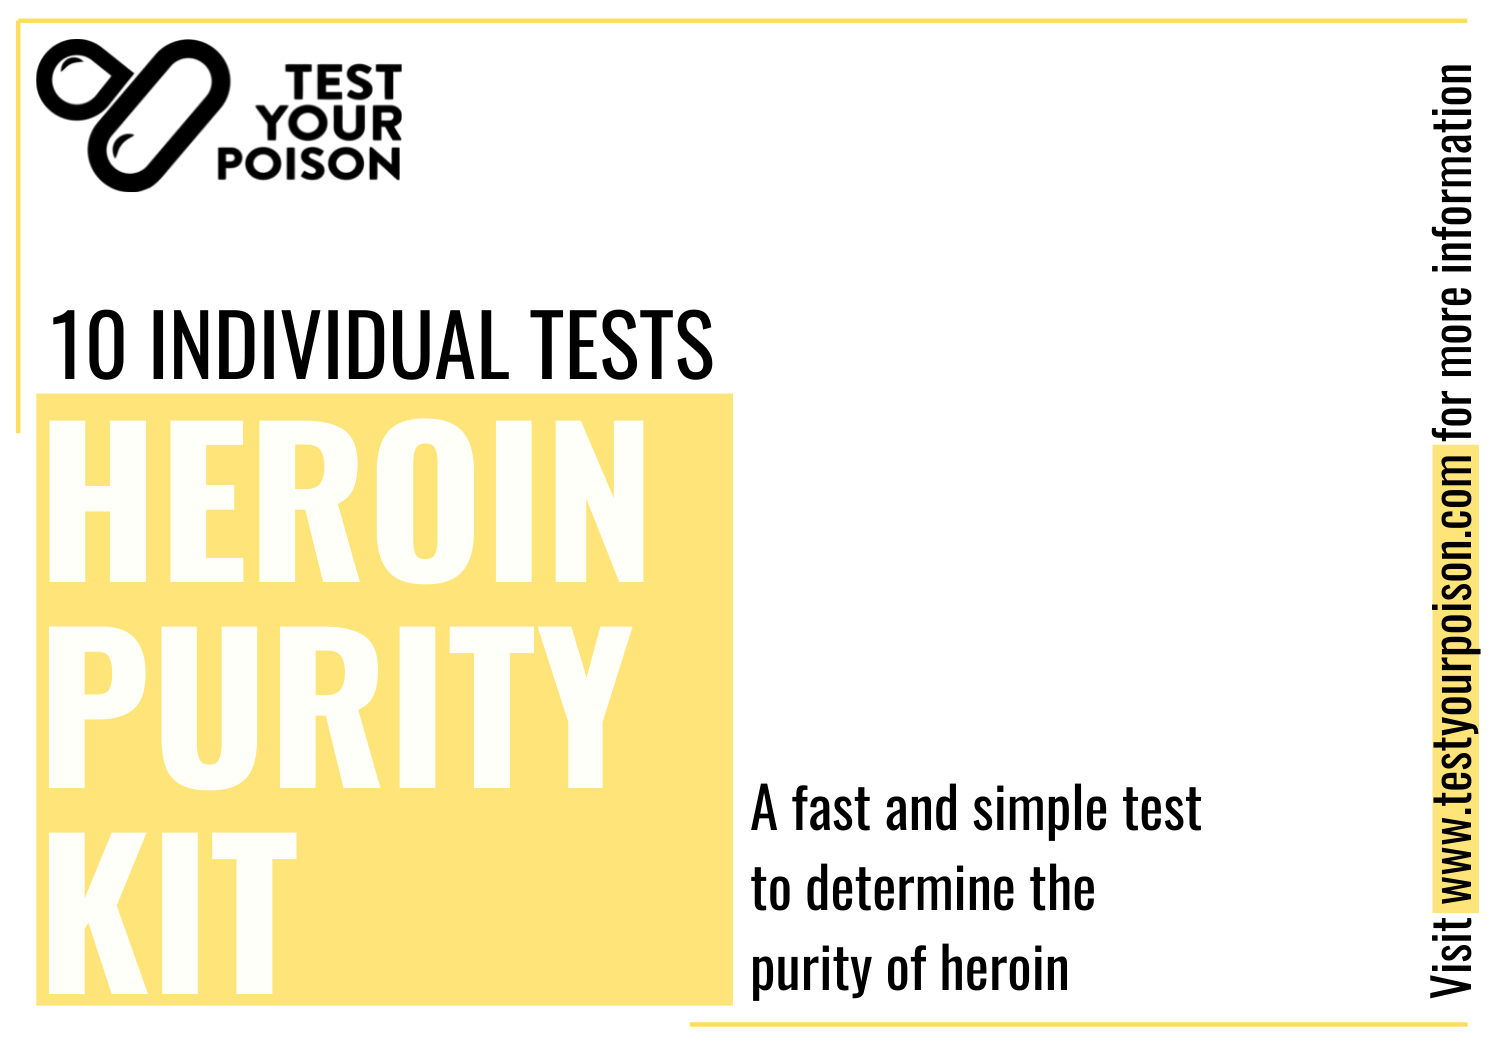 Heroin Purity Testing Kit - Test Your Poison